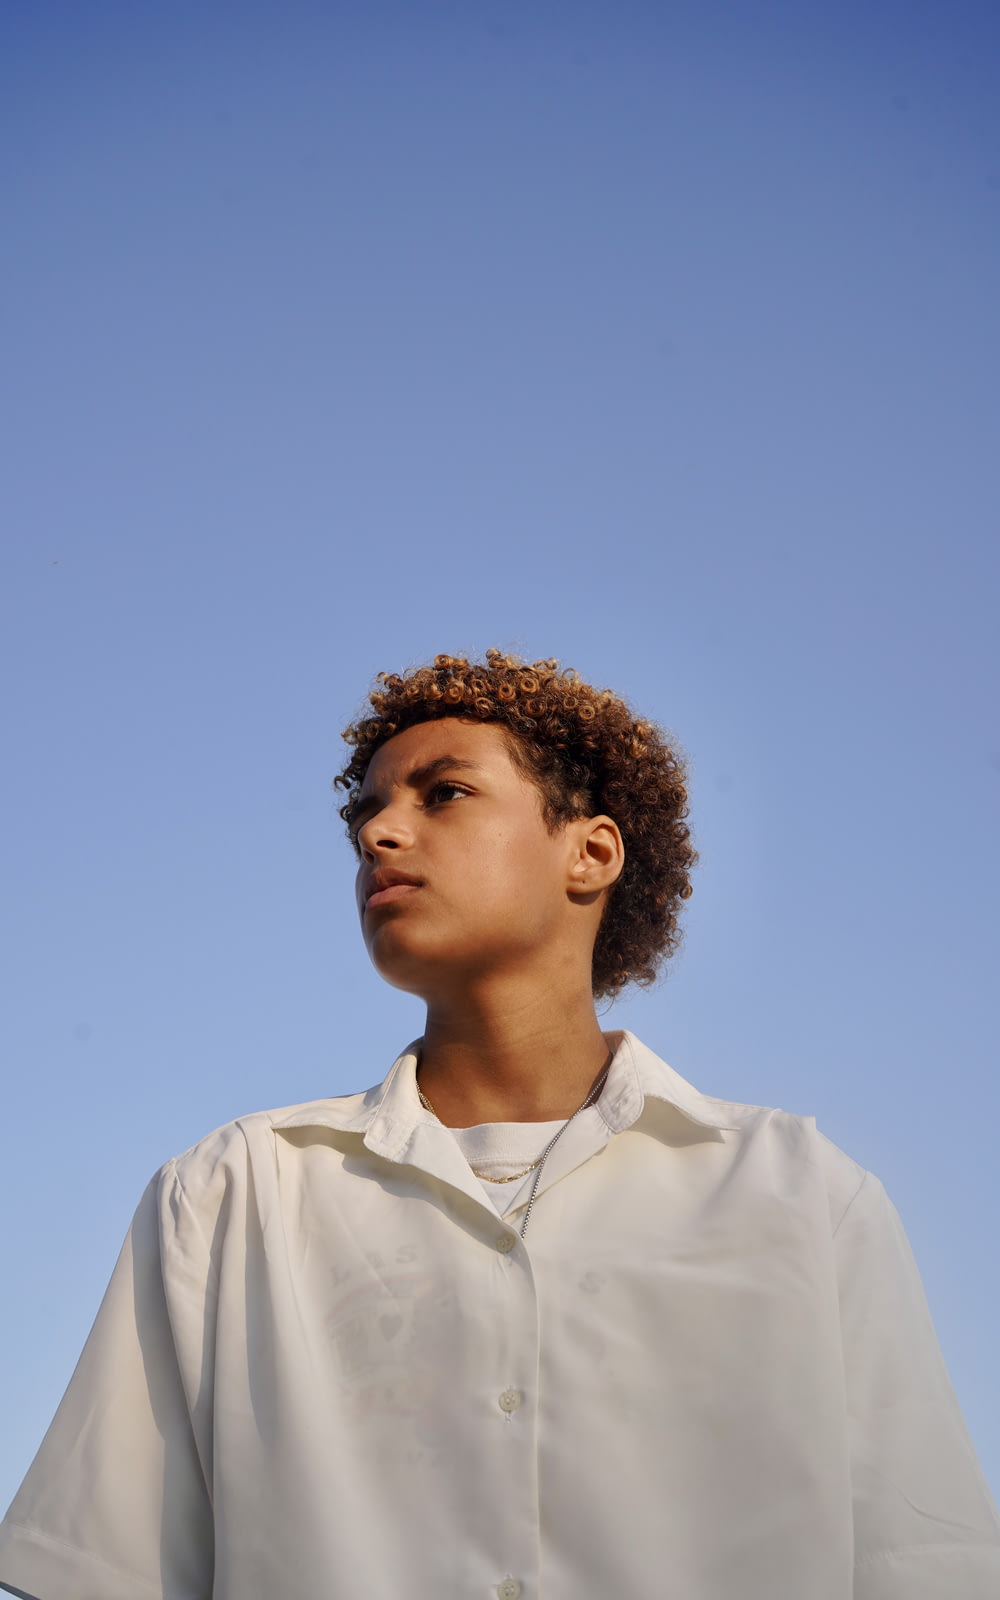 a boy in a white shirt looking up at the sky